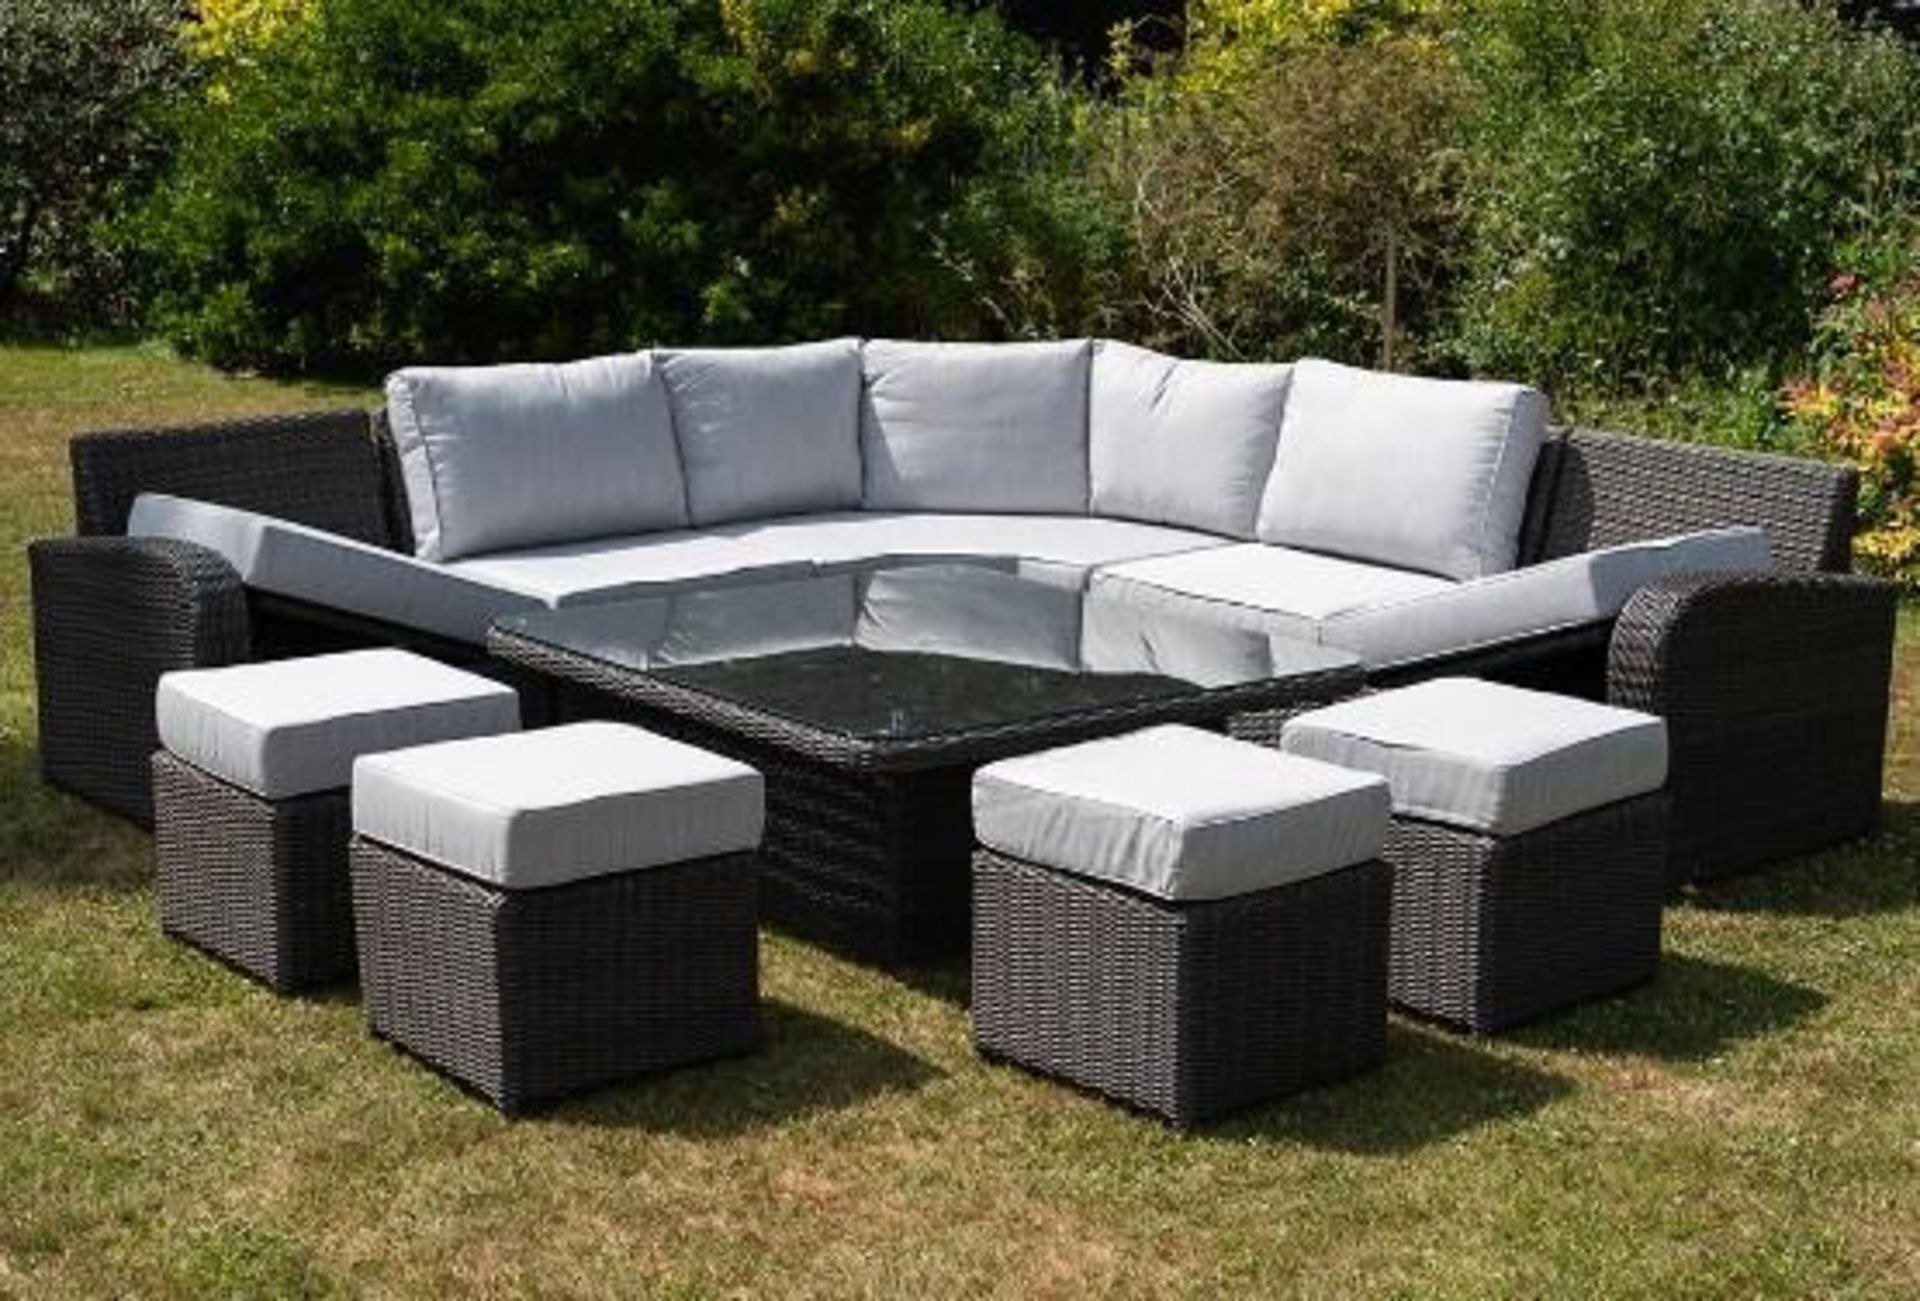 Brand New Moda Furniture, 10 Seater Outdoor Rise and Fall Table Dining Set in Natural with Cream - Image 7 of 12